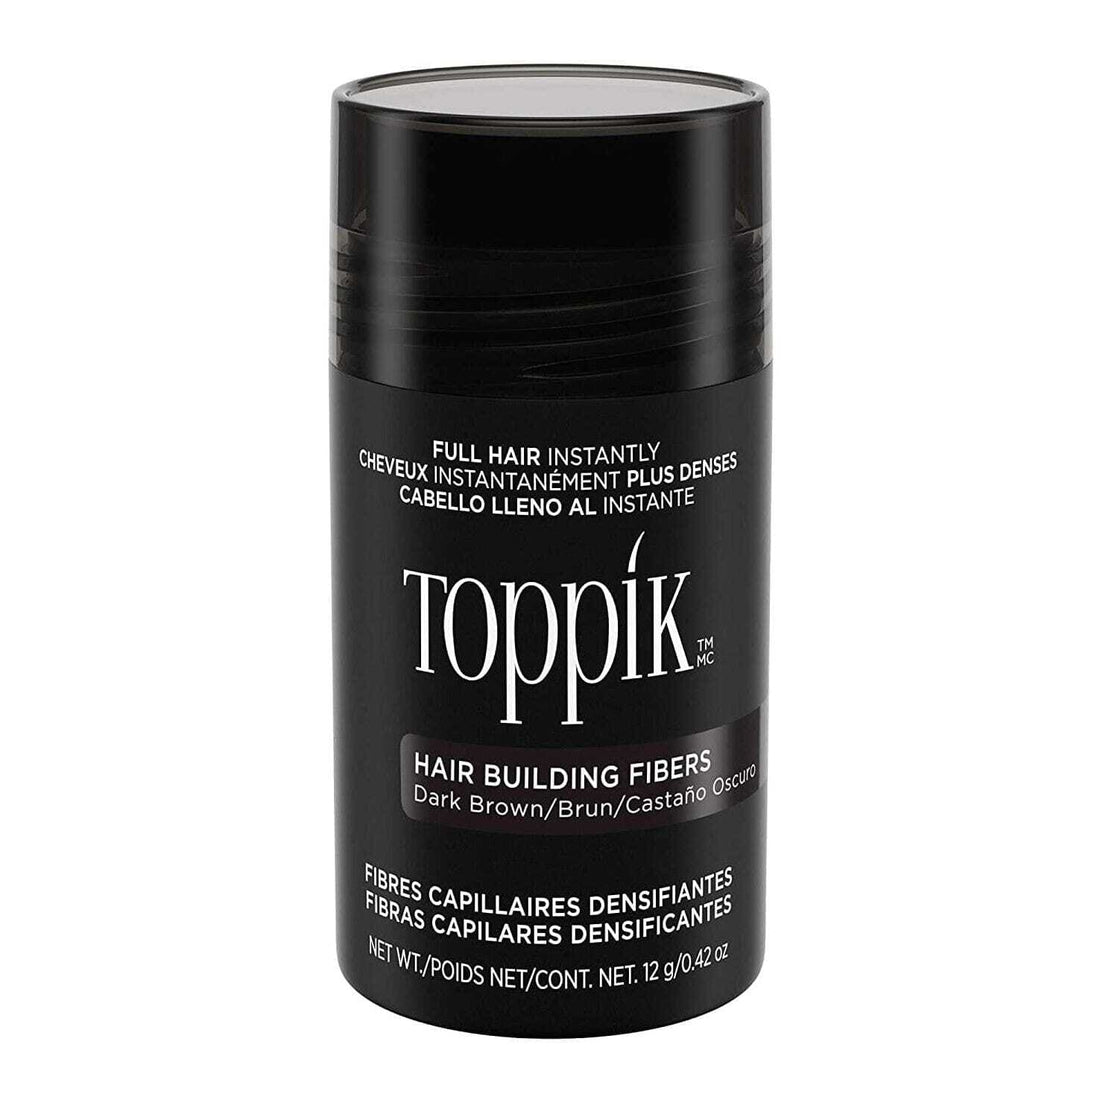 Toppik Hair Building Fibers - DARK BROWN Hair Styling Products Toppik 0.42 oz Shop at Skin Type Solutions